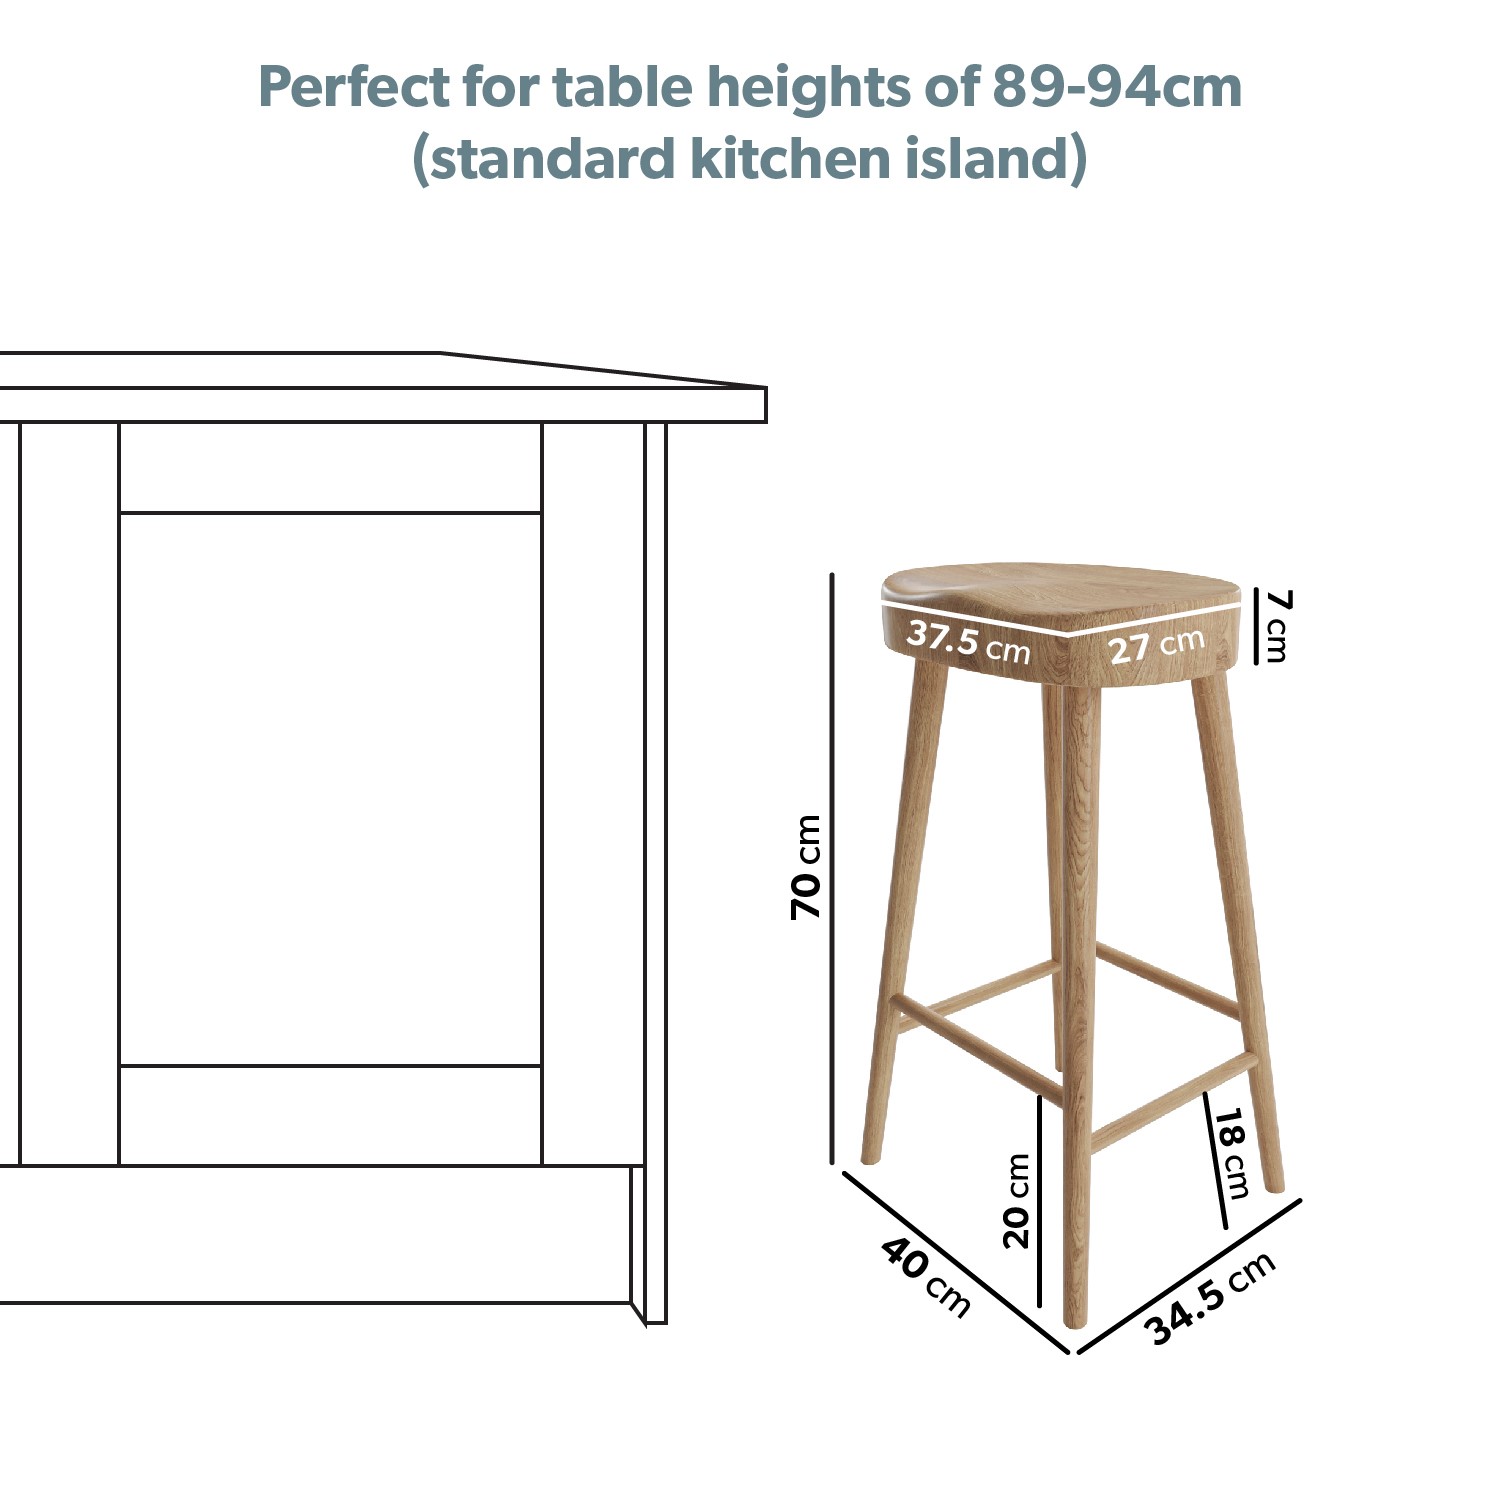 Read more about Set of 3 solid oak kitchen stools 70cm rayne